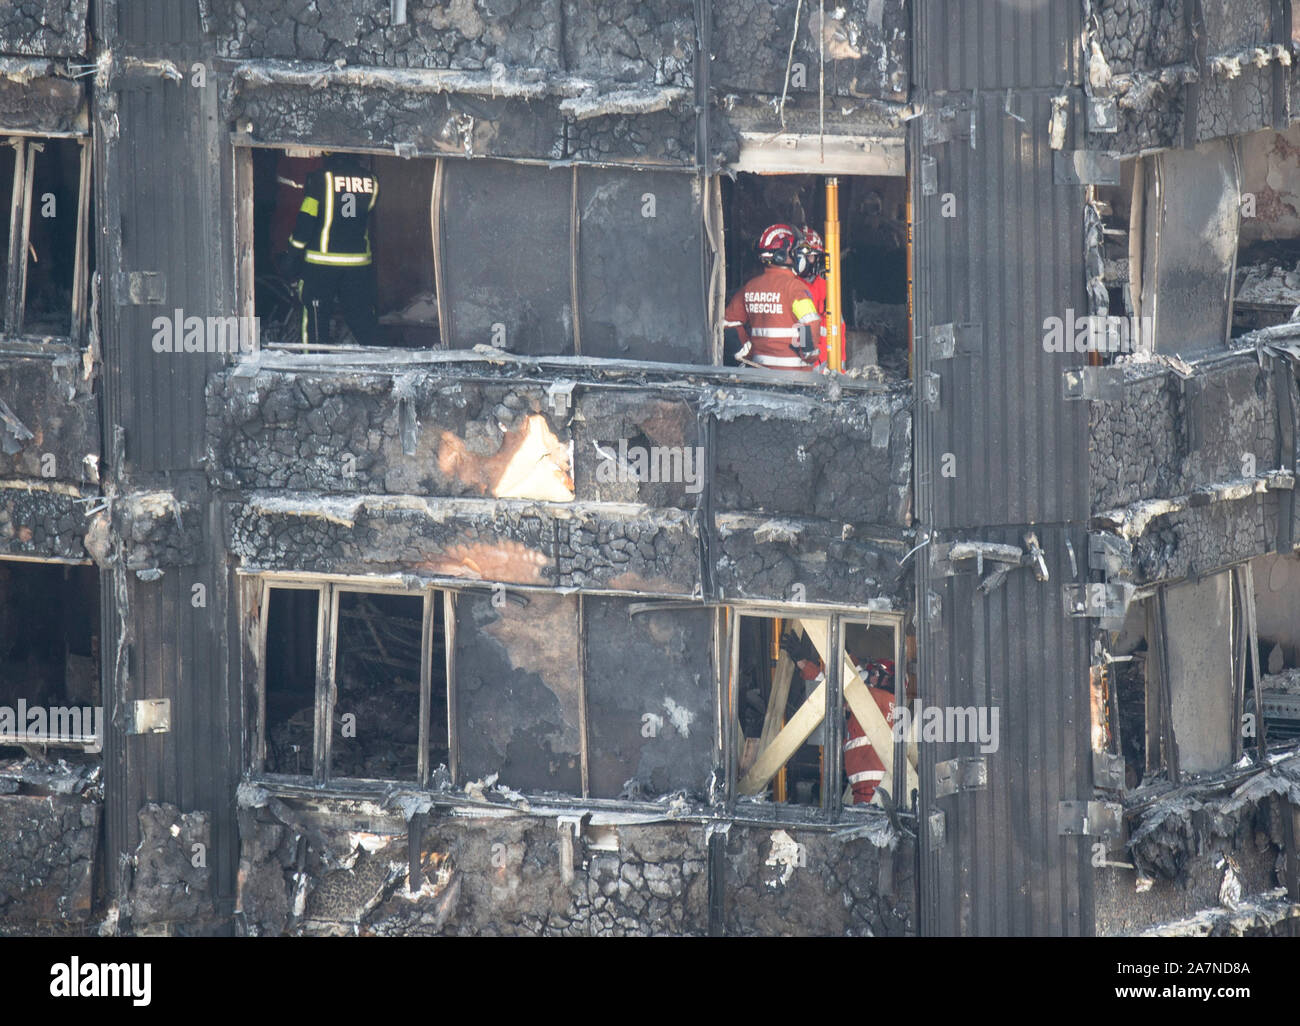 Firefighters and members of the Urban Search and Rescue team break for a moments silence before they continue to search for victims in the remains of Grenfell Tower fire disaster in North Kensington, West London. The fire was the deadliest domestic fire since the second world war. The fire broke out in the 24 storey block of flats just before 1:00am on the 14th June 2017 causing 72 deaths and injuring more than 70 people. Stock Photo